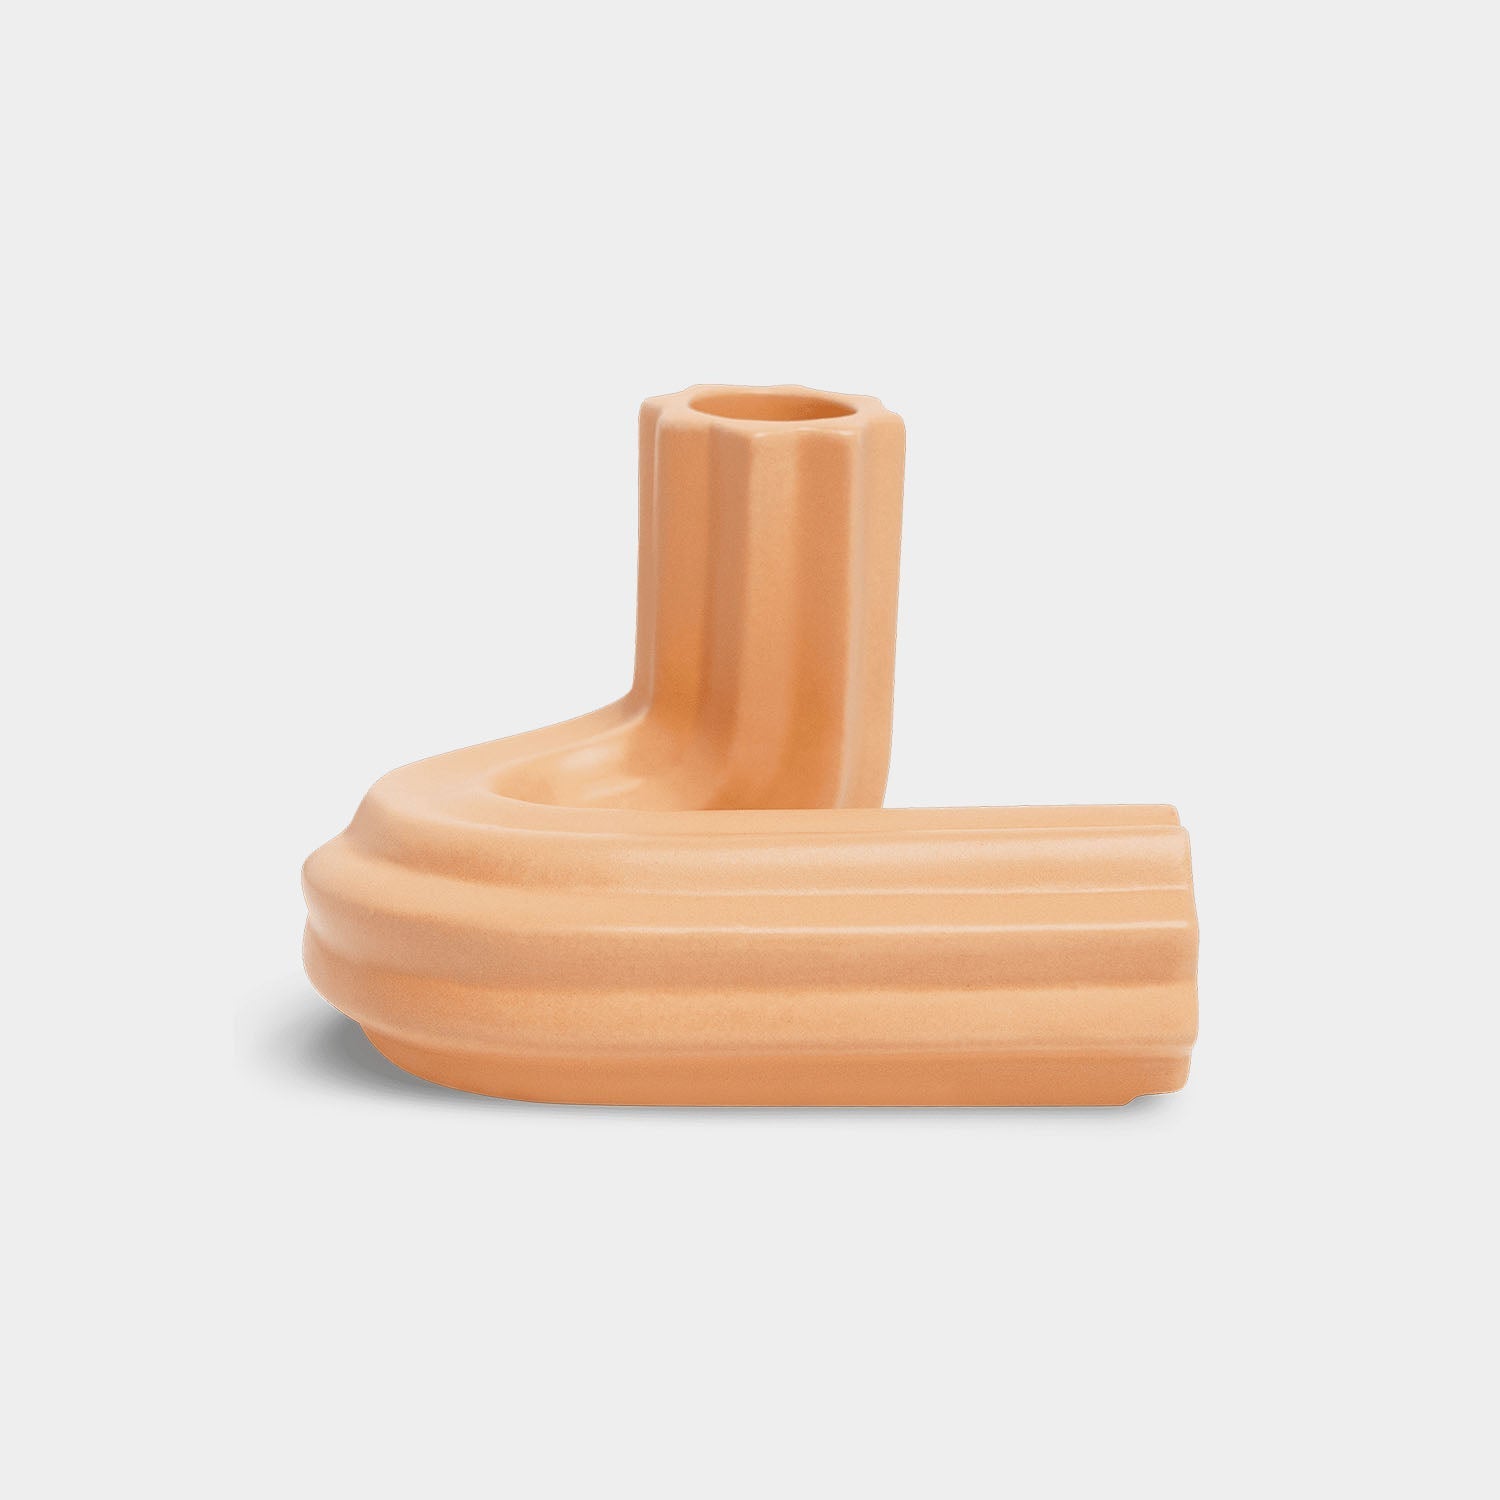 Templo Candle Holder in orange by OCTAEVO